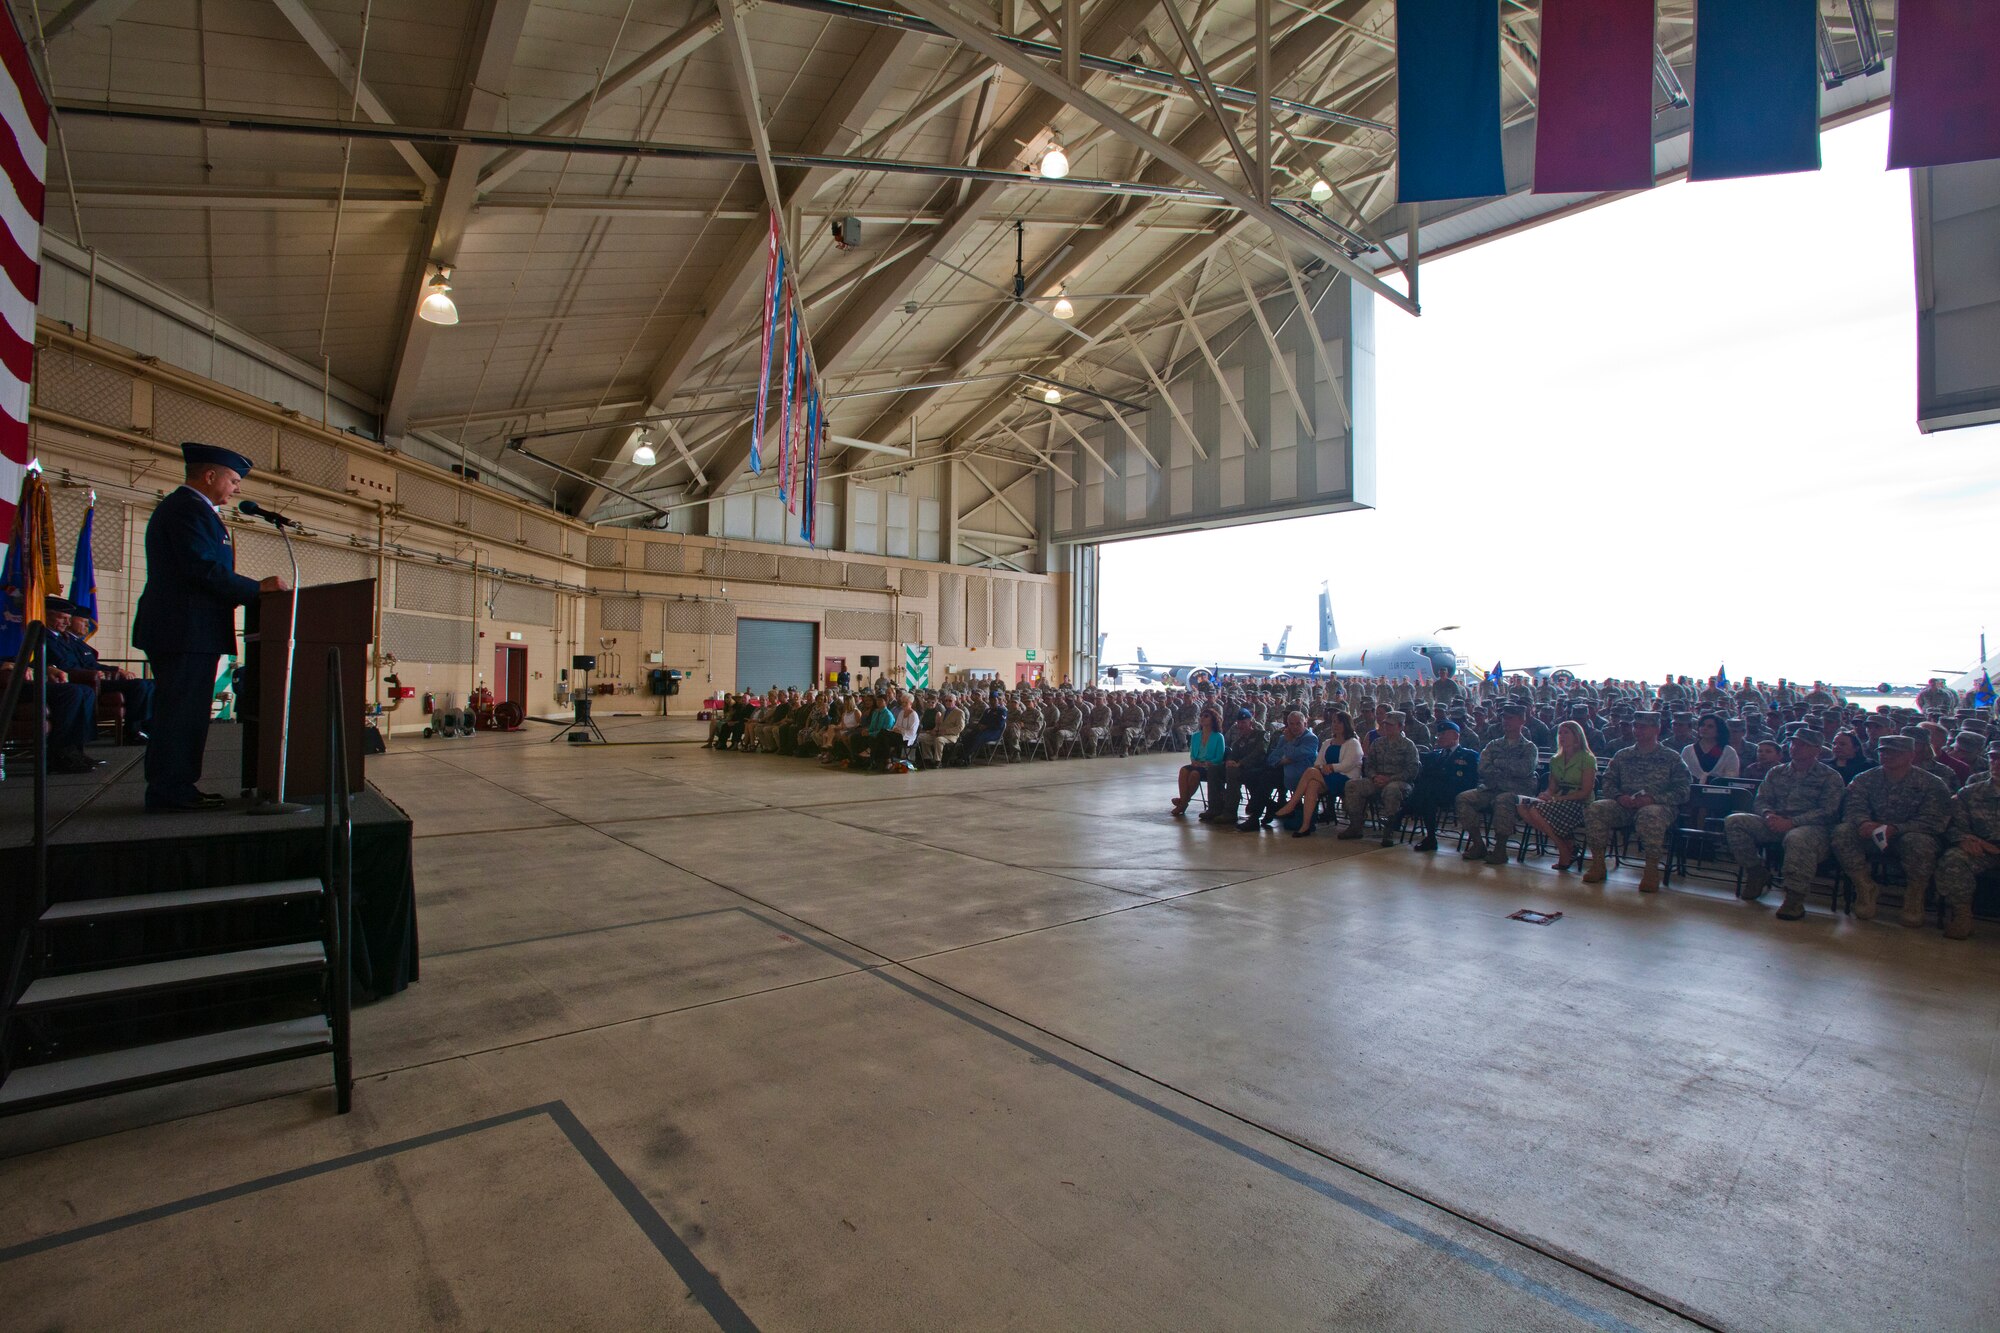 Col. Robert A. Meyer Jr. assumes command of the 108th Wing, New Jersey Air National Guard, from Brig. Gen. Kevin J. Keehn during a change of command ceremony at Joint Base McGuire-Dix-Lakehurst, N.J., June 22, 2014. A change of command ceremony is a military tradition that represents the formal transfer of authority and responsibility for a unit from one commanding or flag officer to another. Since Sept. 11, 2001, the 108th Wing has deployed Airmen around the globe in support of Operation's Iraqi Freedom, Noble Eagle, Enduring Freedom and New Dawn. (U.S. Air National Guard photo by Master Sgt. Mark C. Olsen/Released)